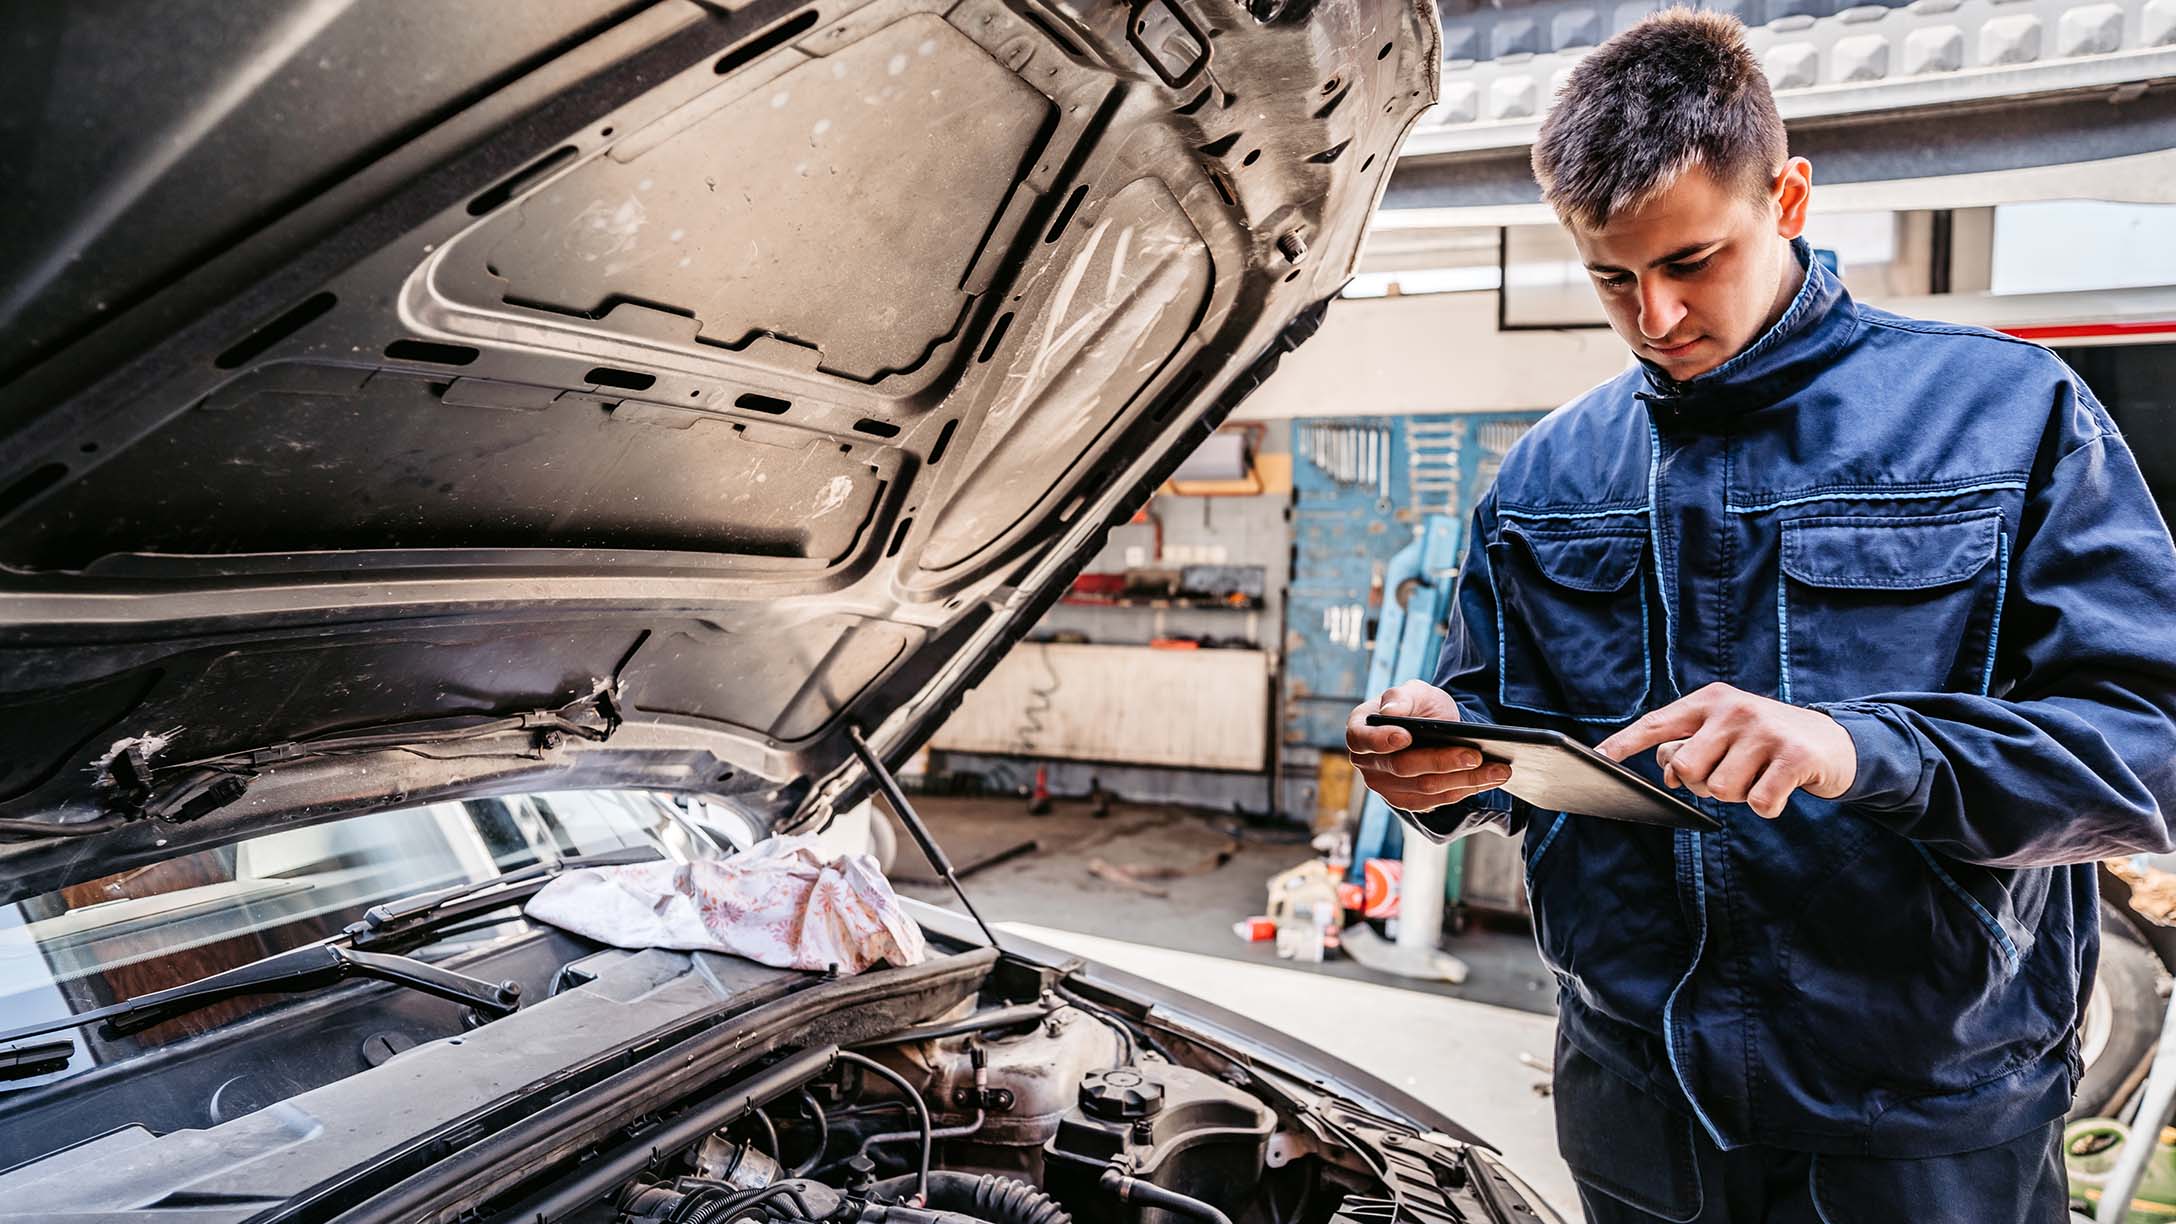 What are the key components of fleet servicing?